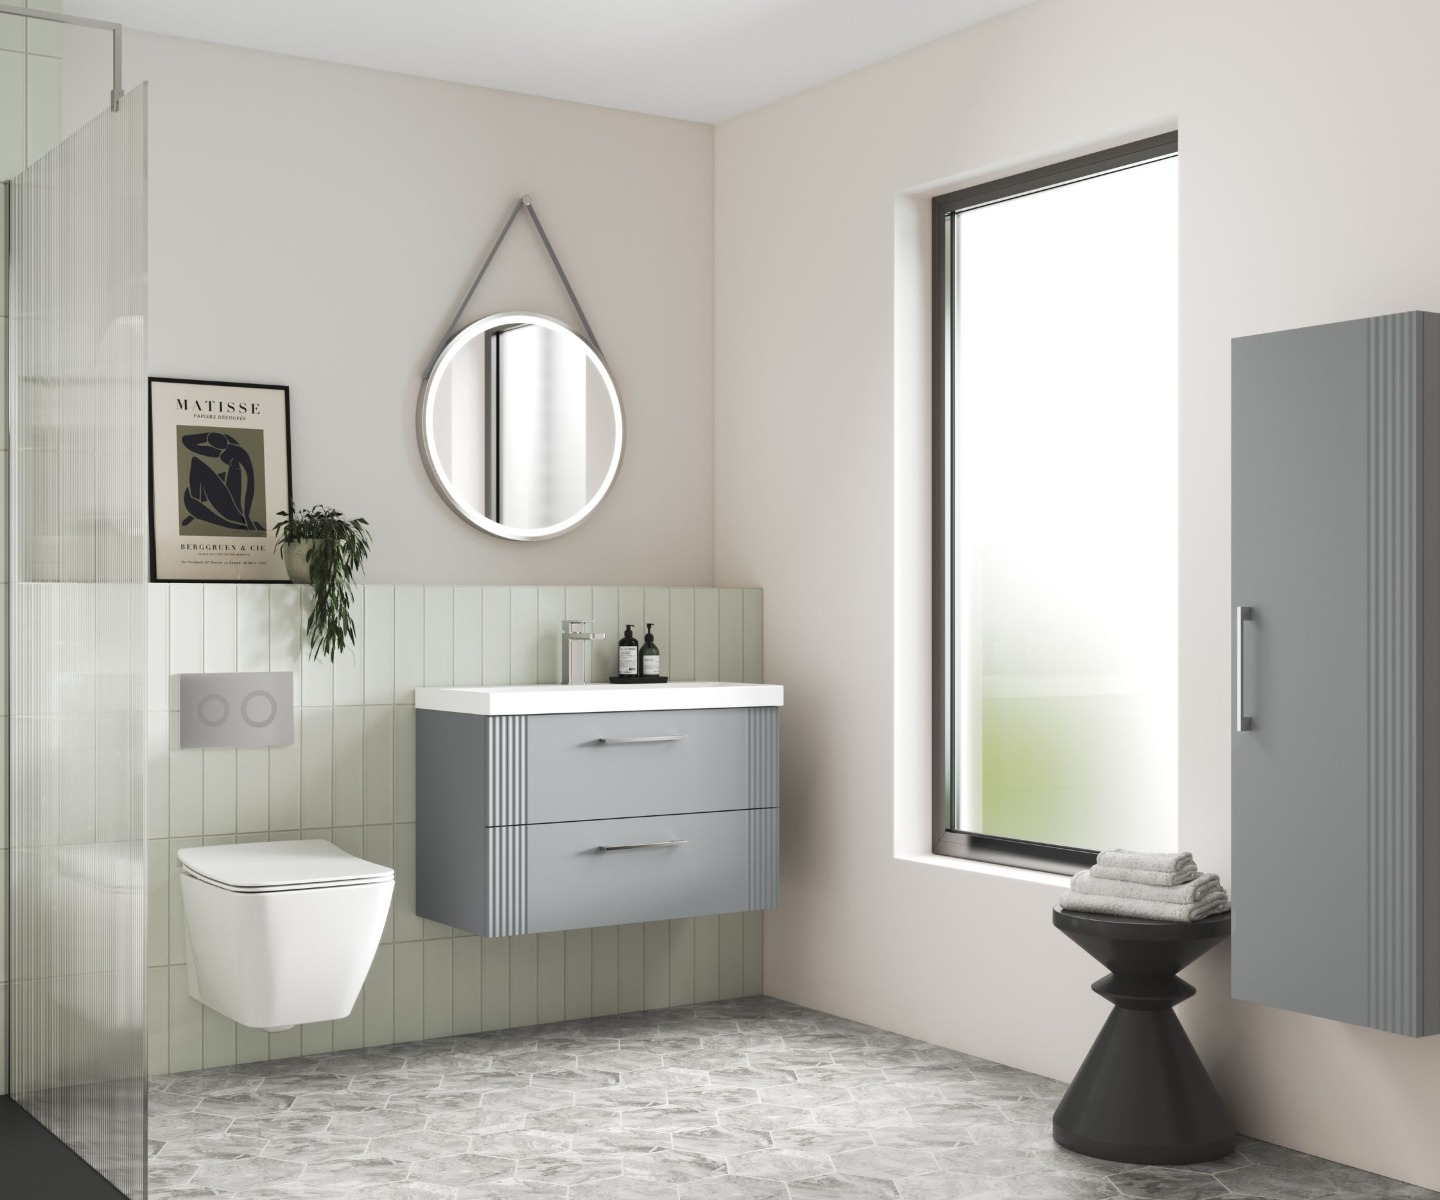 natural light in bathroom with large window